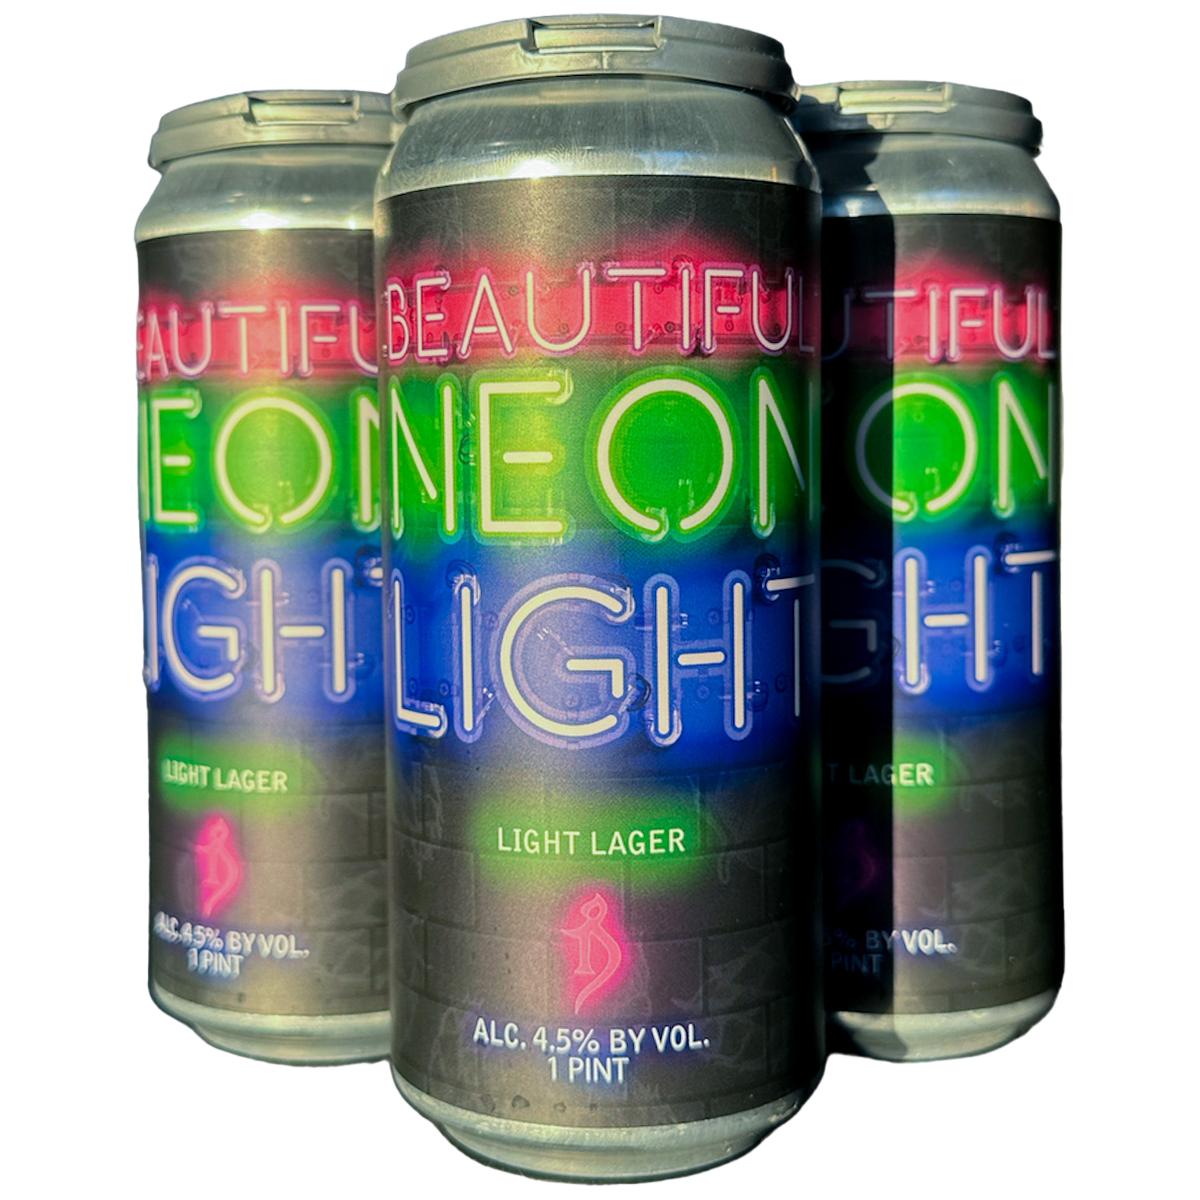 ALCHEMIST CRUSHER DOUBLE IPA 16OZ CAN LIMIT 1 CAN READ INFO LIVE 8AM PST  5/18